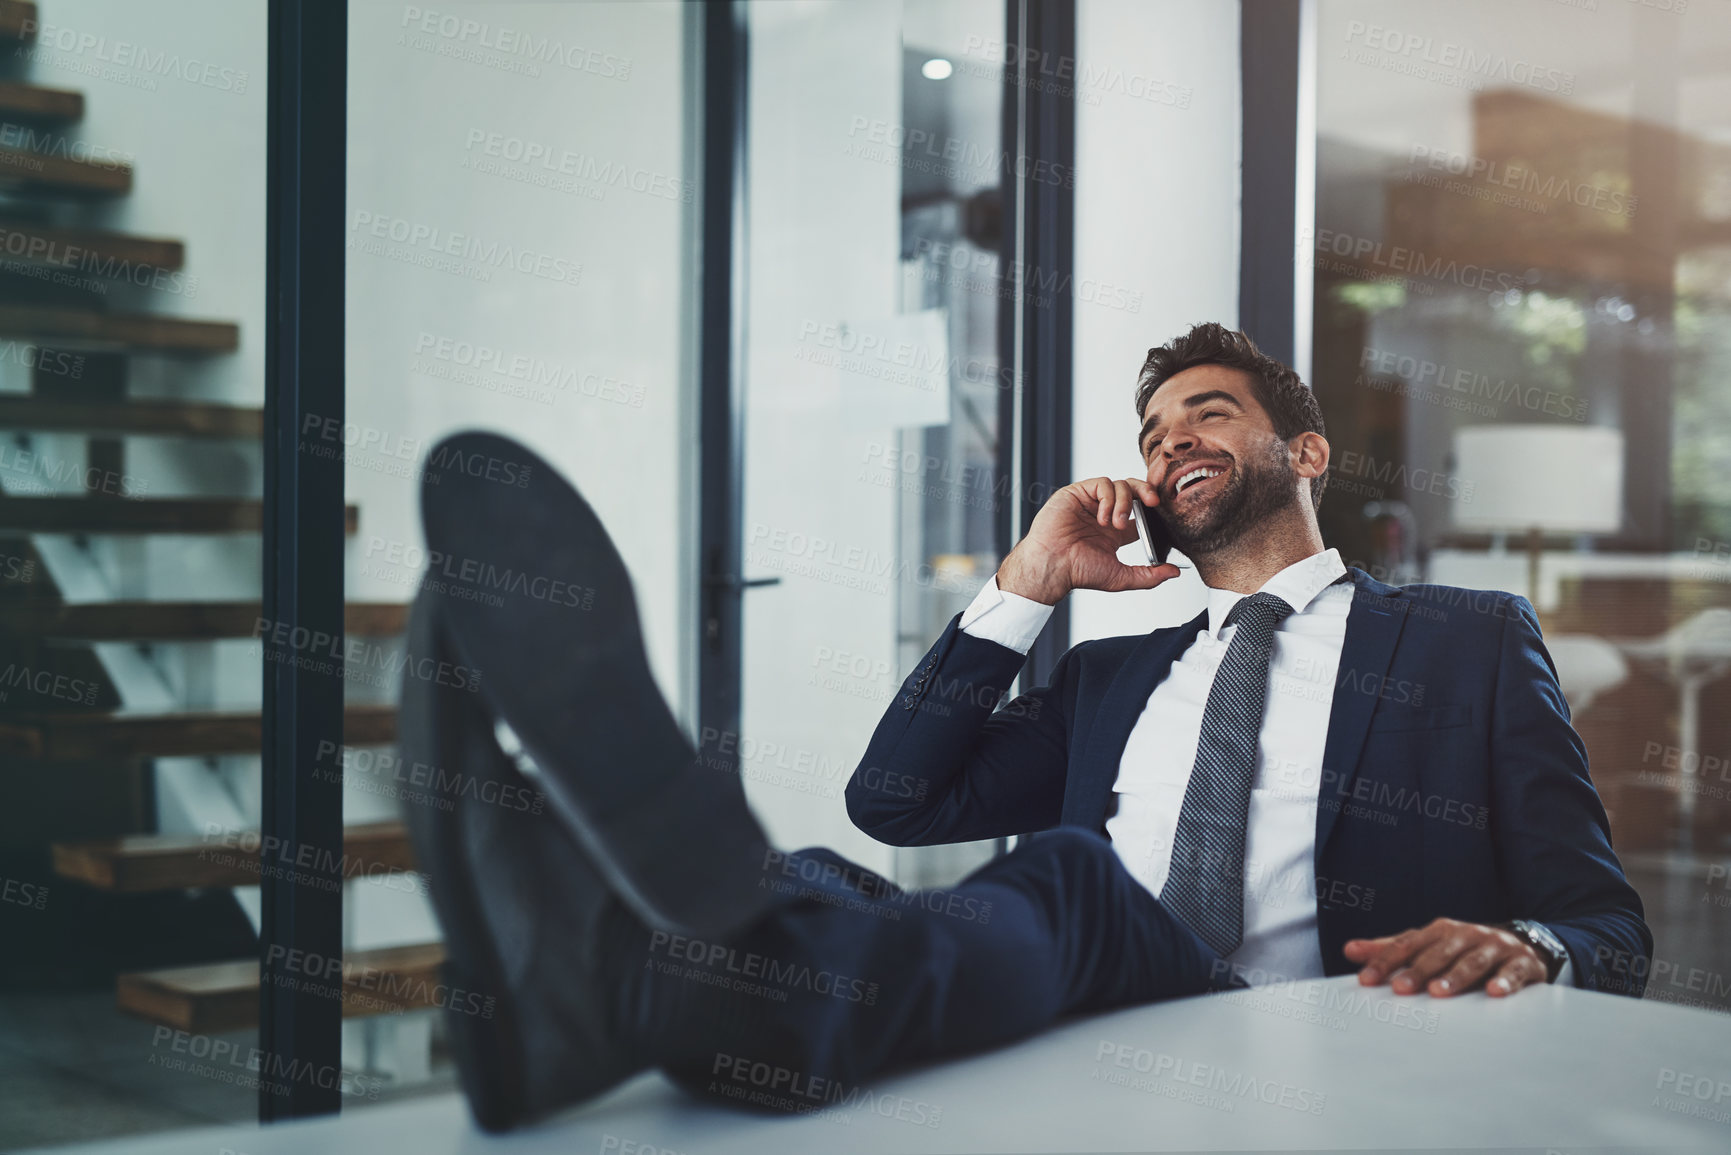 Buy stock photo Shot of a handsome young businessman relaxing with his feet up on an office desk while using his phone